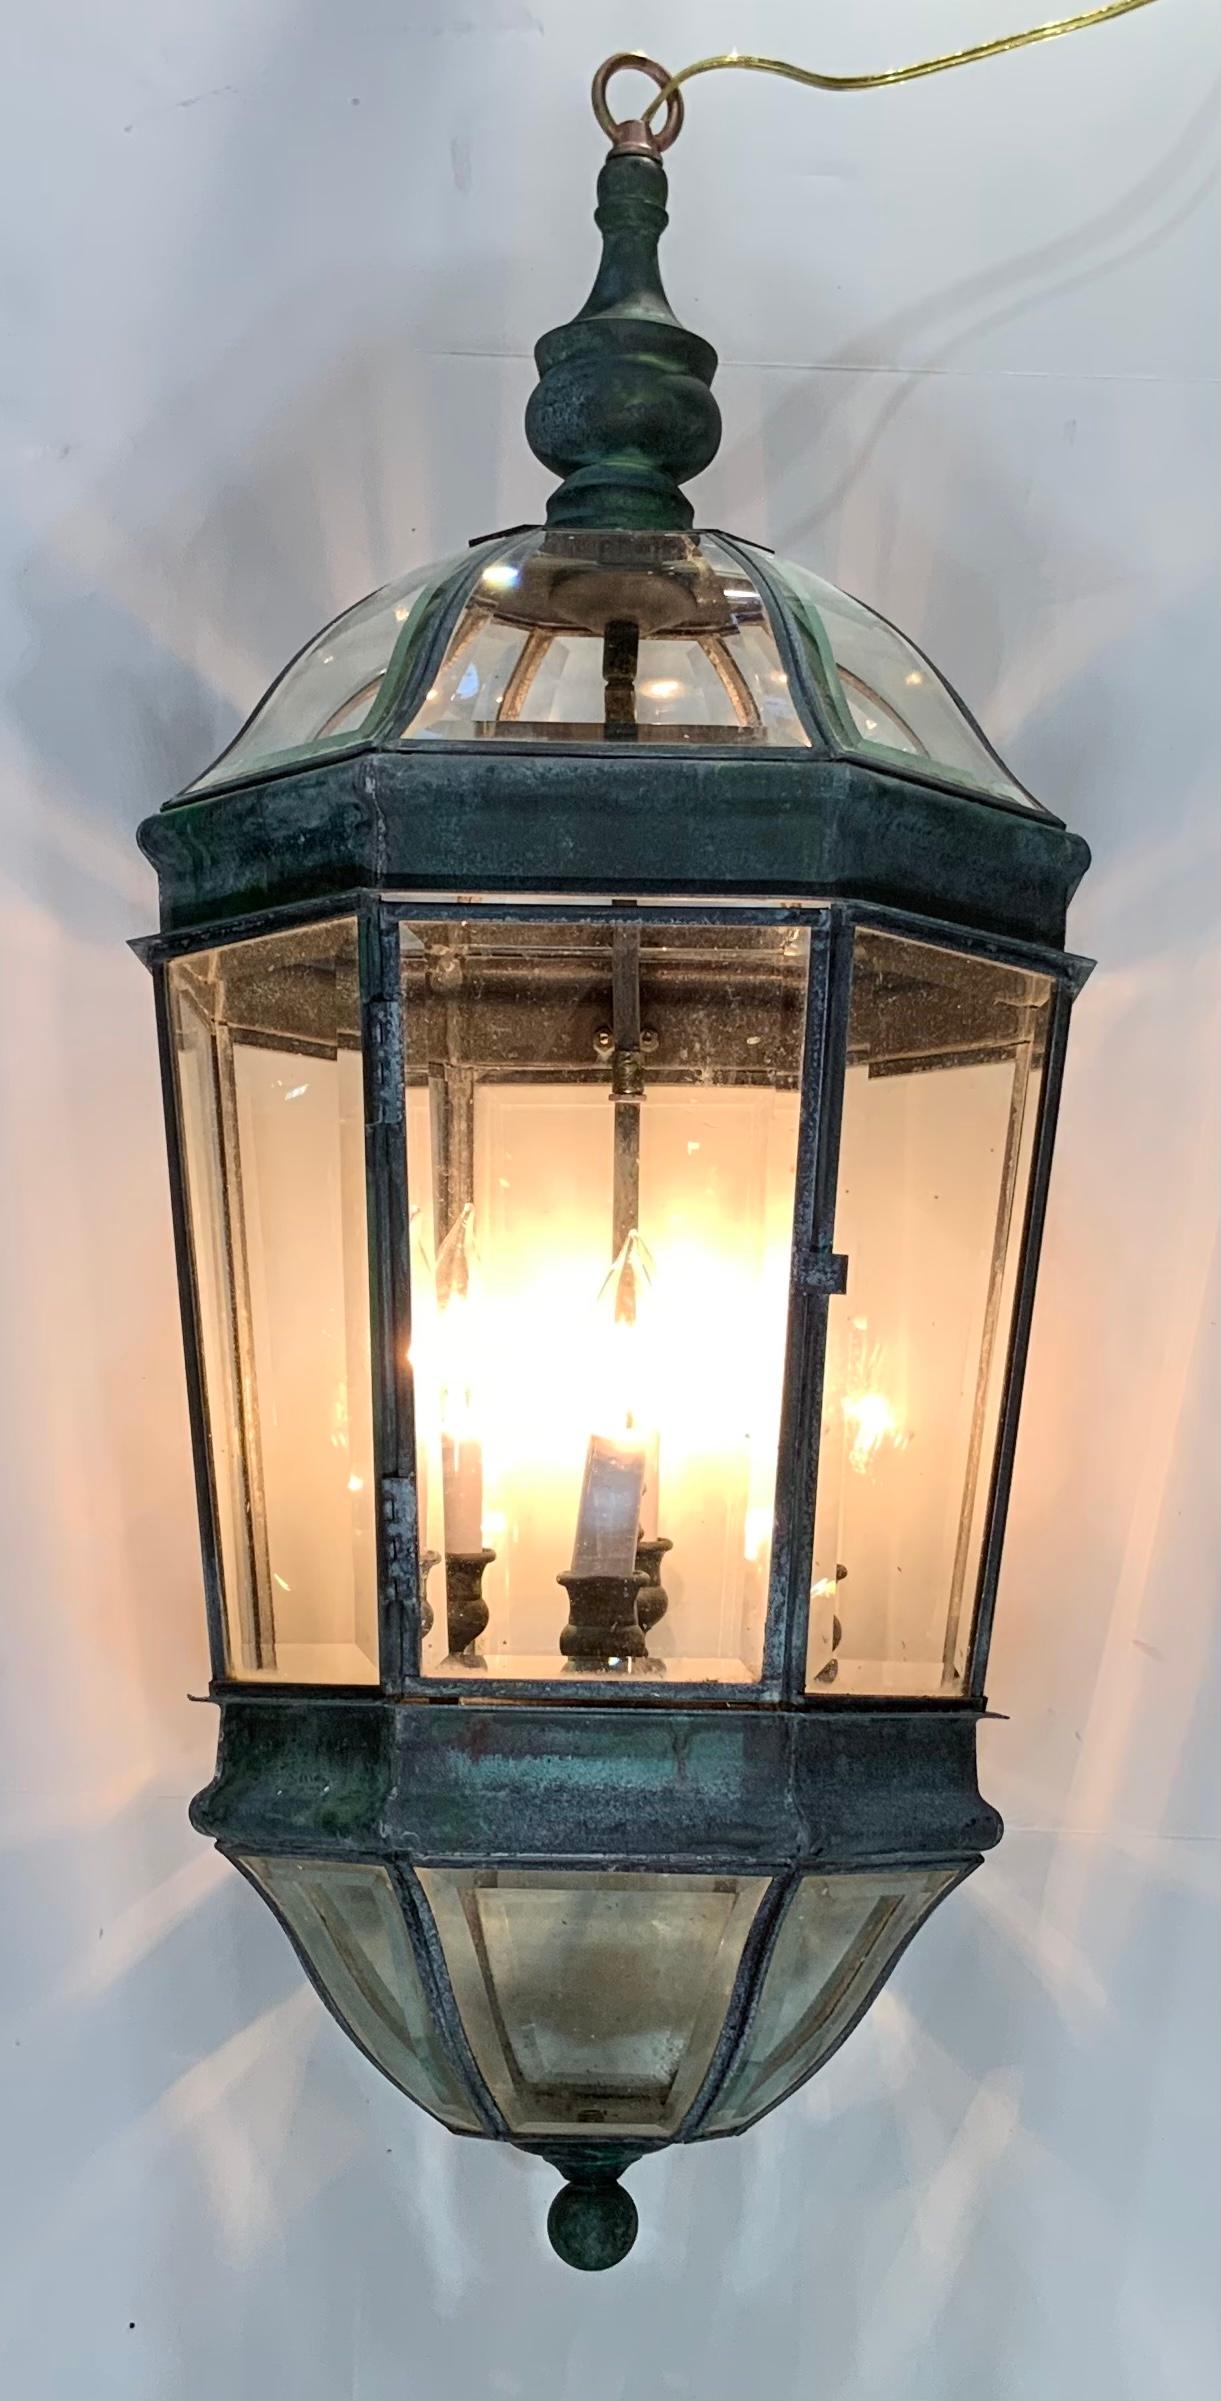 Elegant handcrafted lantern made of solid brass, open glass top and bottom give dramatic light exposure, with beveled glass all over.
Electrified with Four 40/watt lights, good for wet locations, although could be used also as decorative indoor